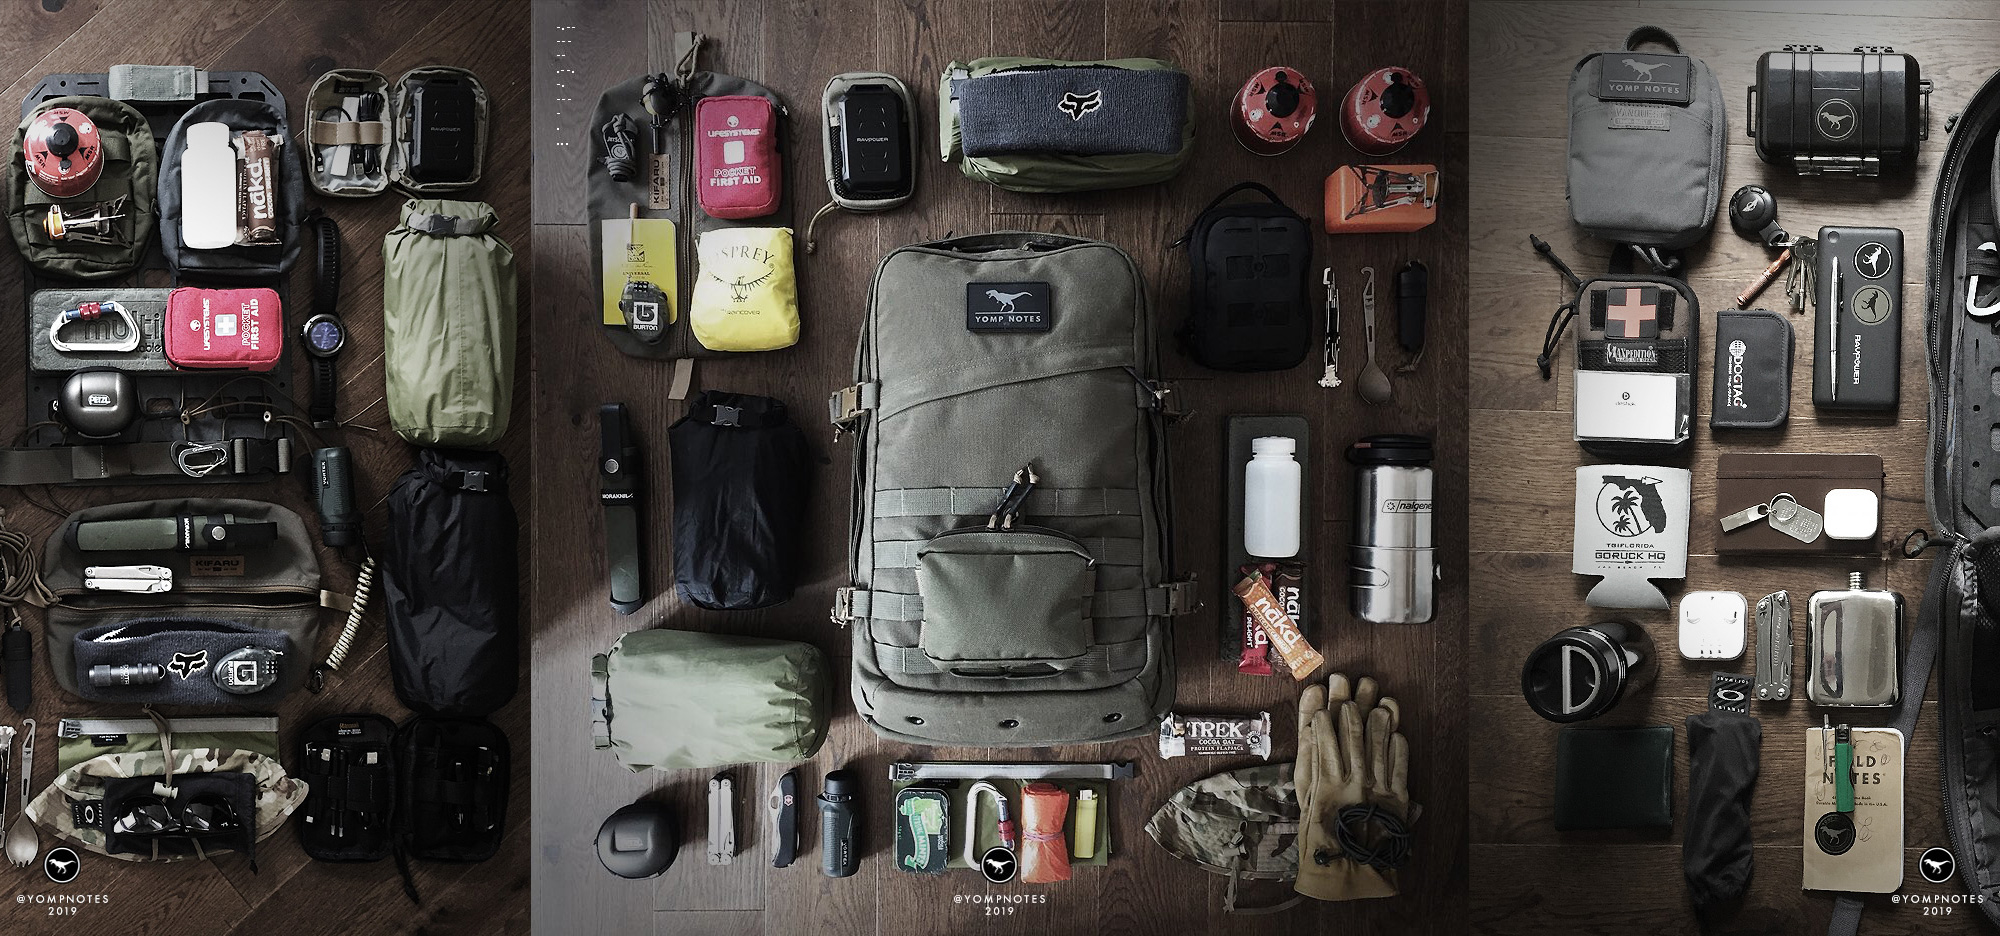 Yomp Notes – The Gear Journal